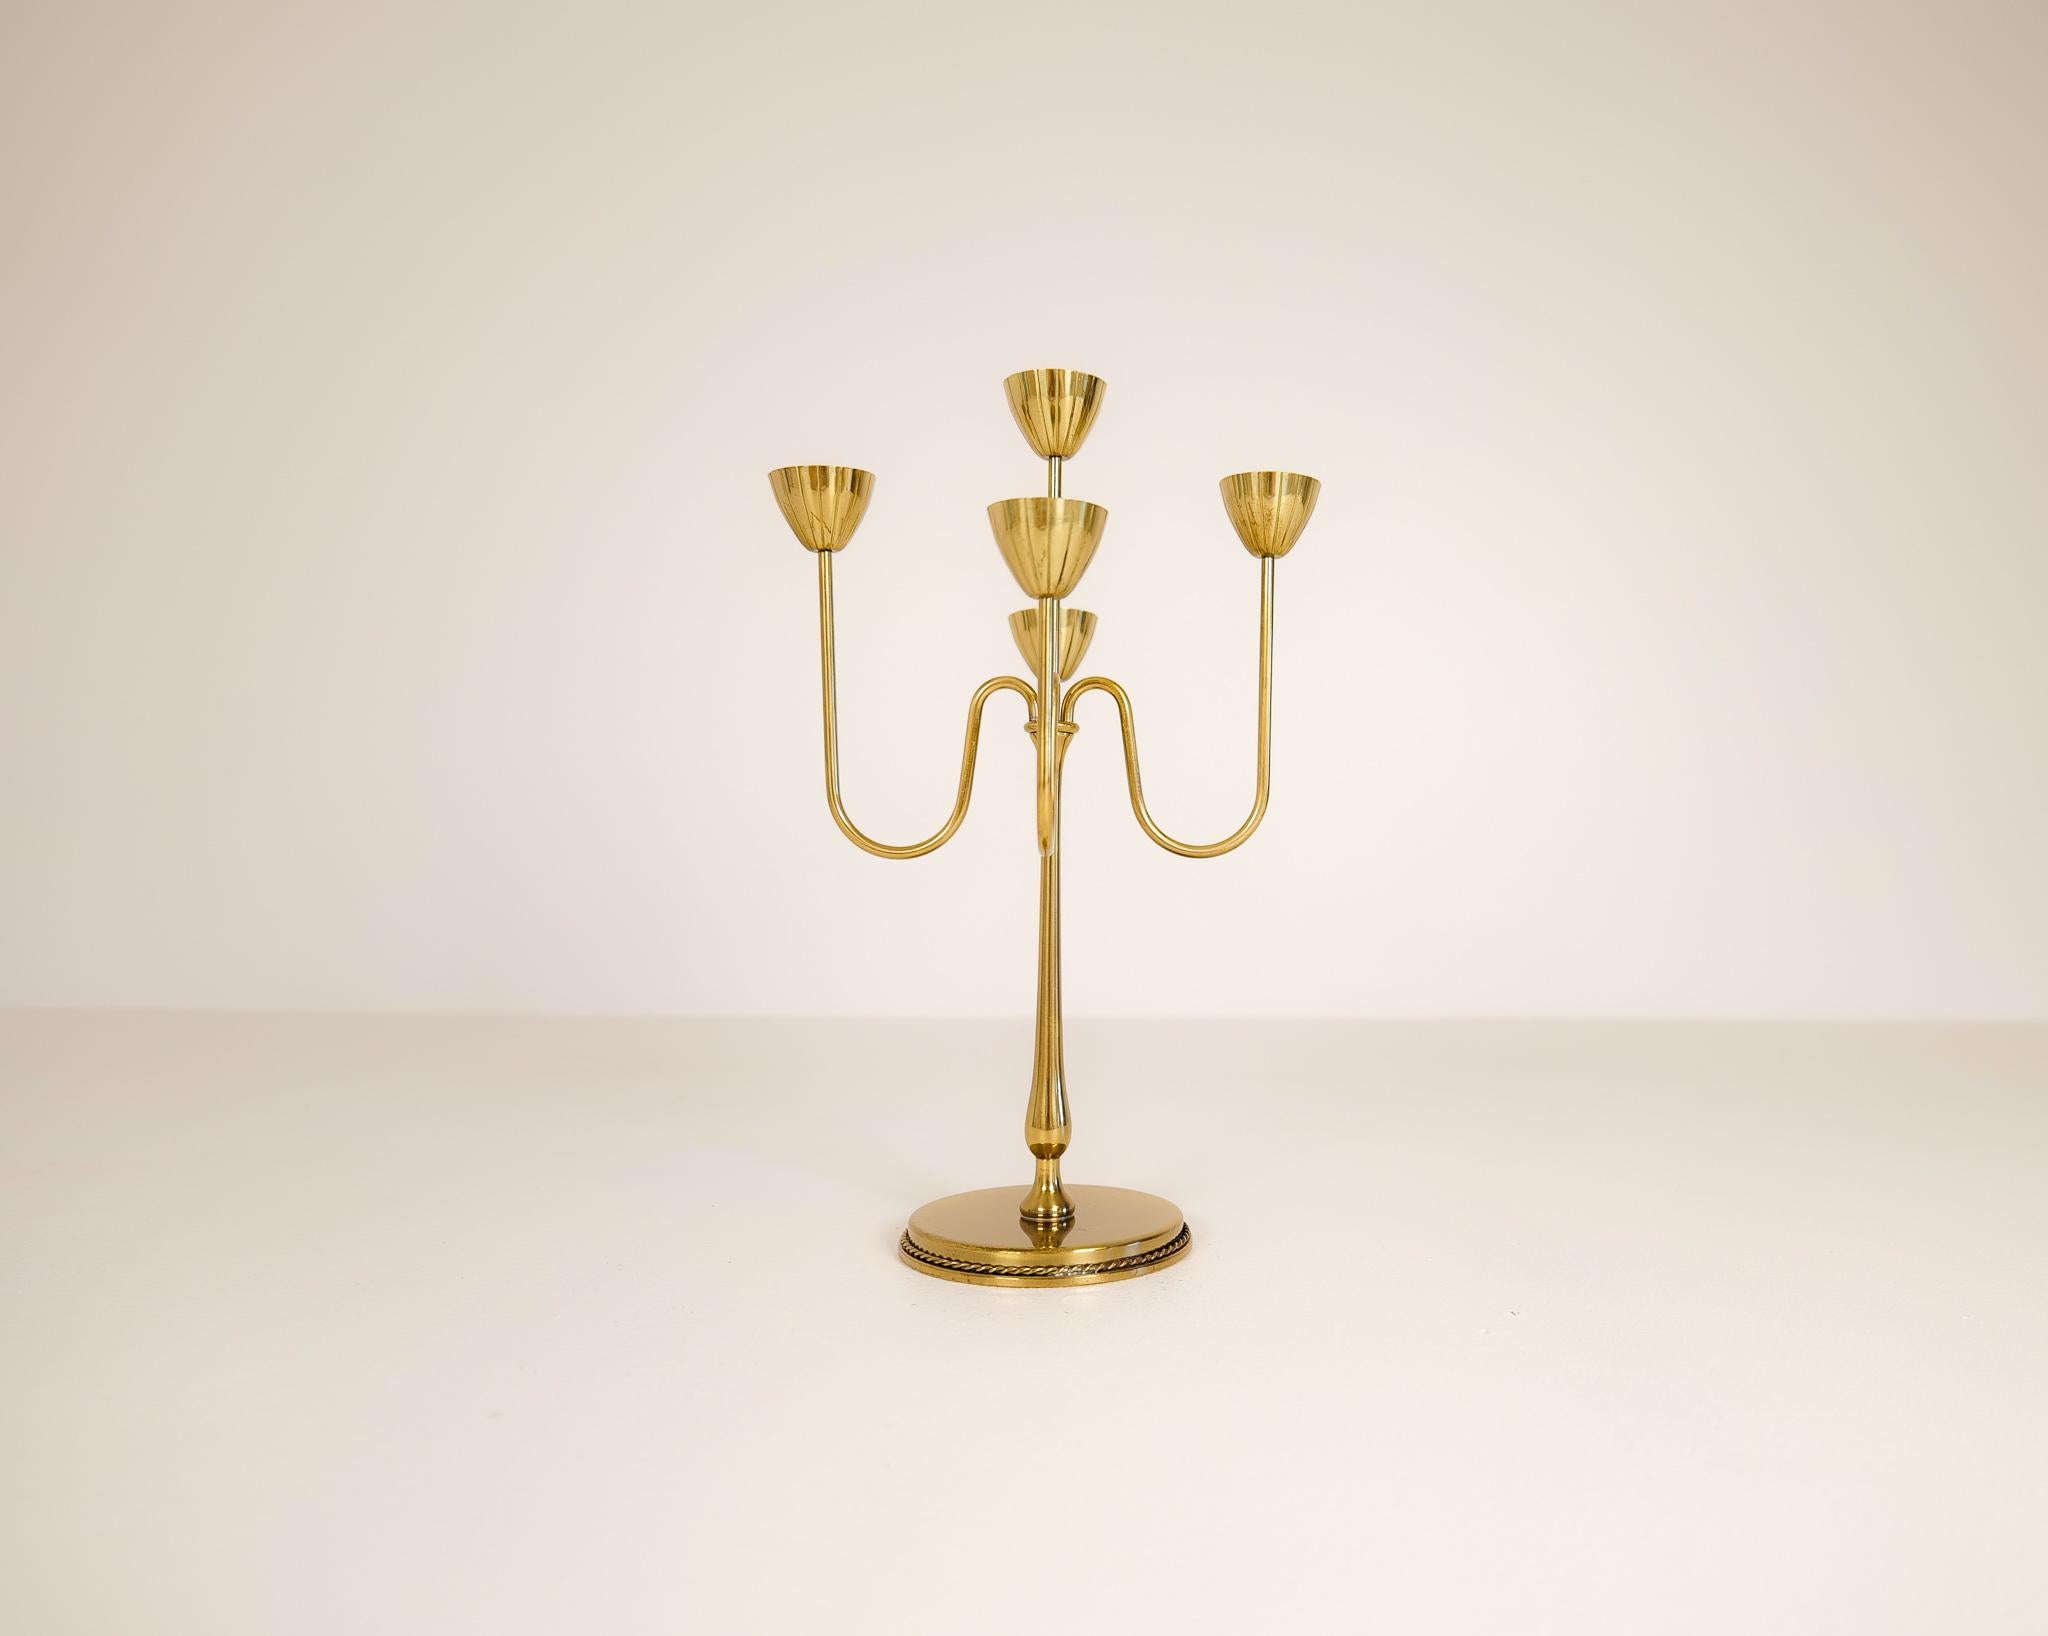 This brass candelabra was made in 1960s at Ystad Metall in Sweden. Designed by Gunnar Ander. Nice, lined brass with holders for small candlesticks.

Good condition with wear of age. 

Dimensions: Height: 12.41 in. (32 cm) Width: 8.08 in. (21 cm)